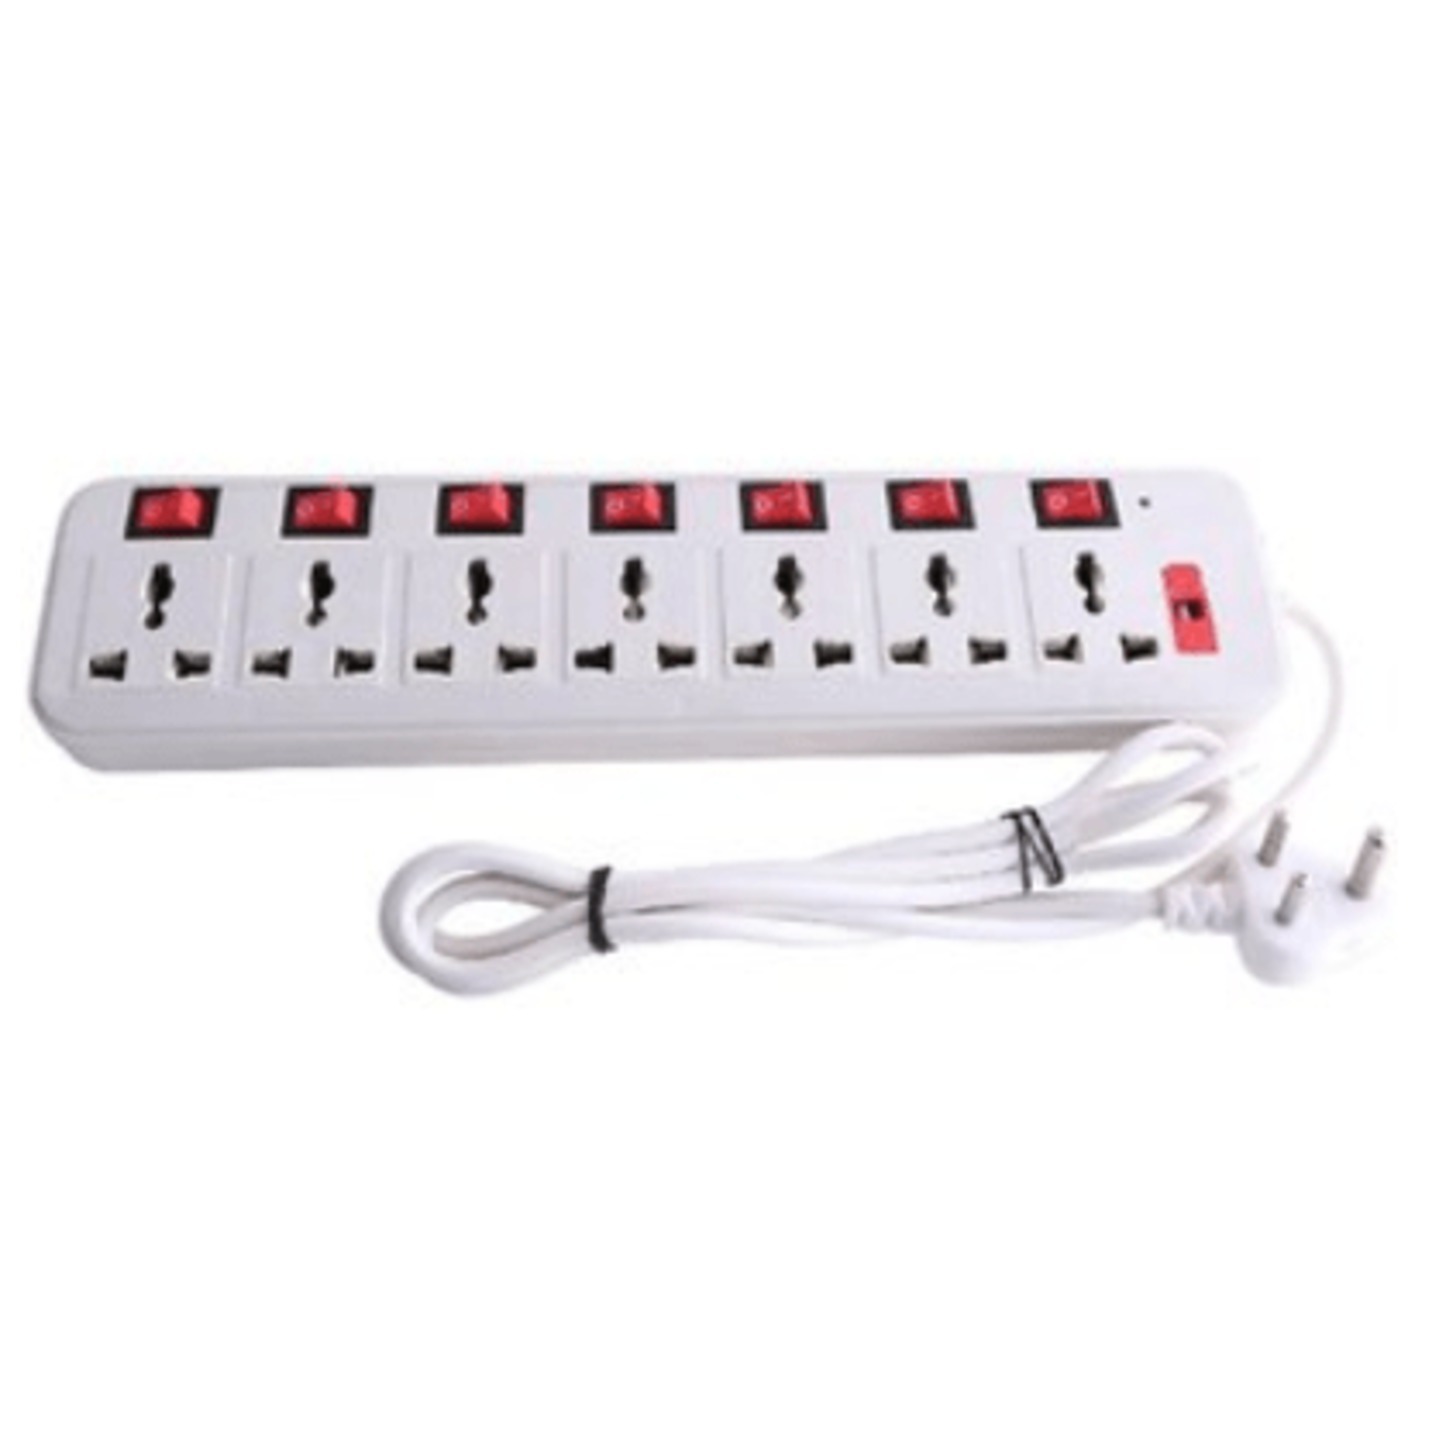 7 socket universal extension board with surge protector